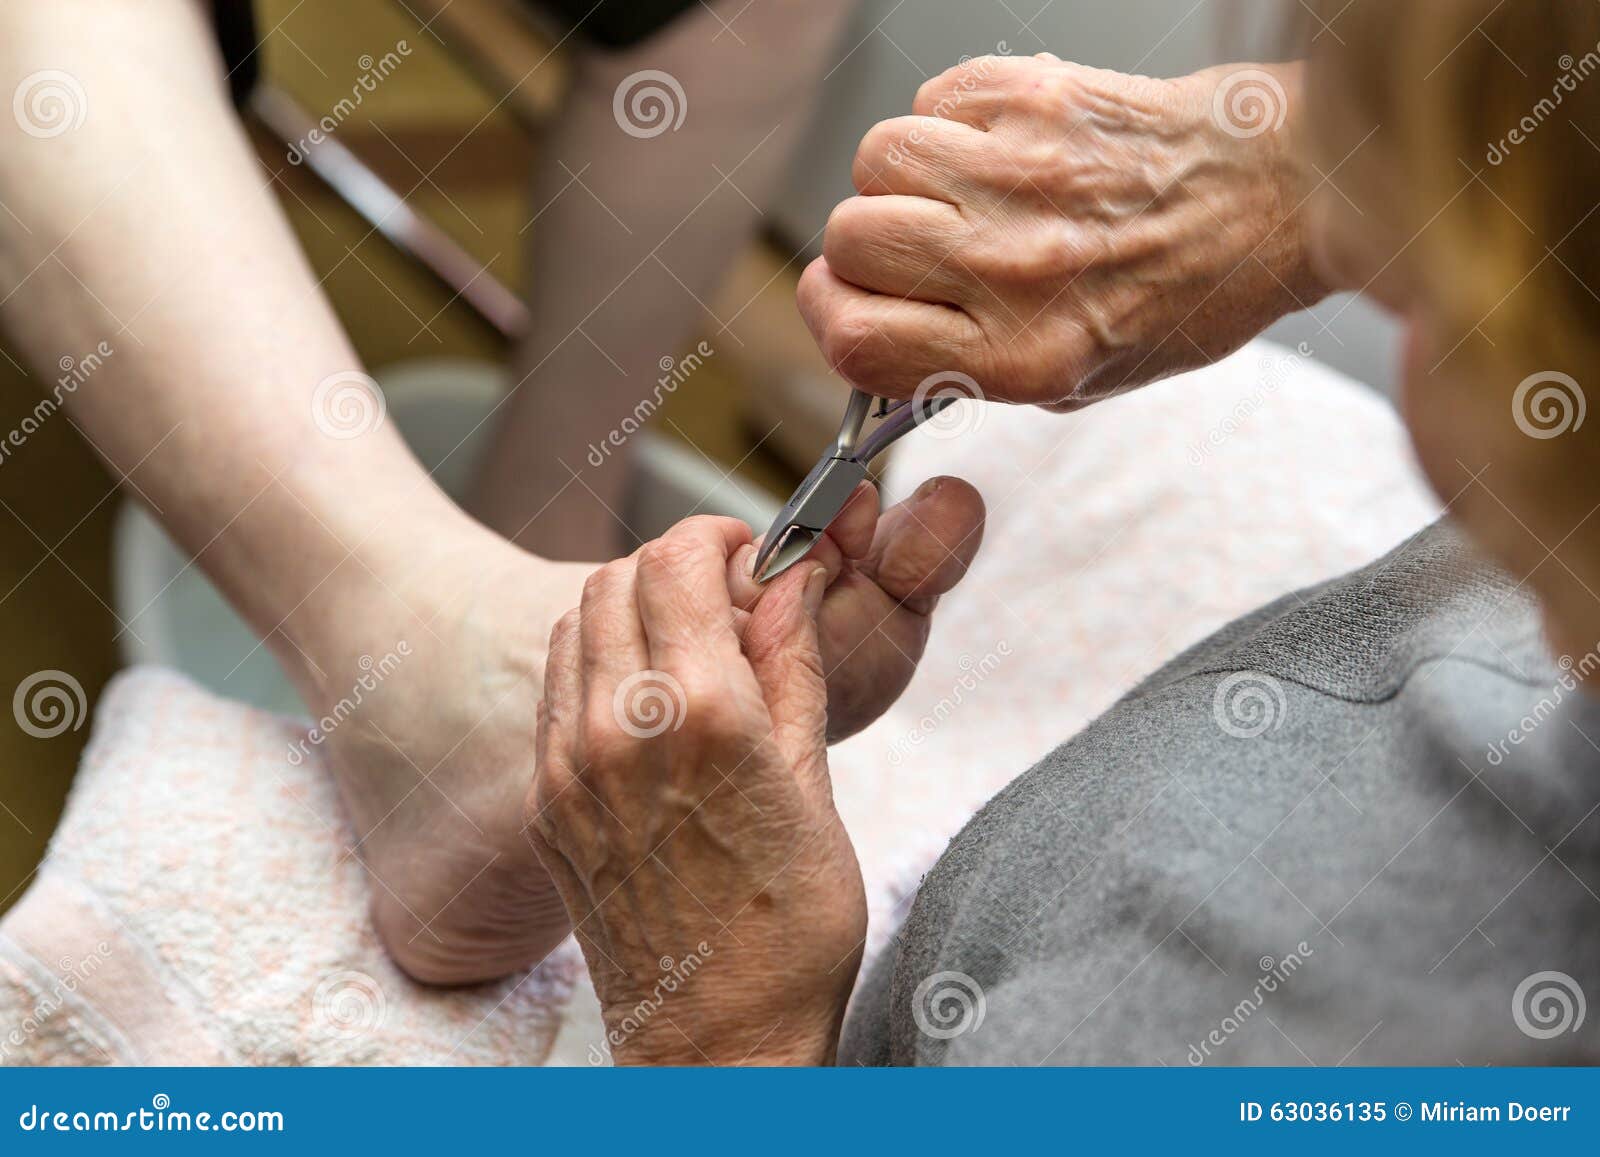 chiropodist with a nail scissors